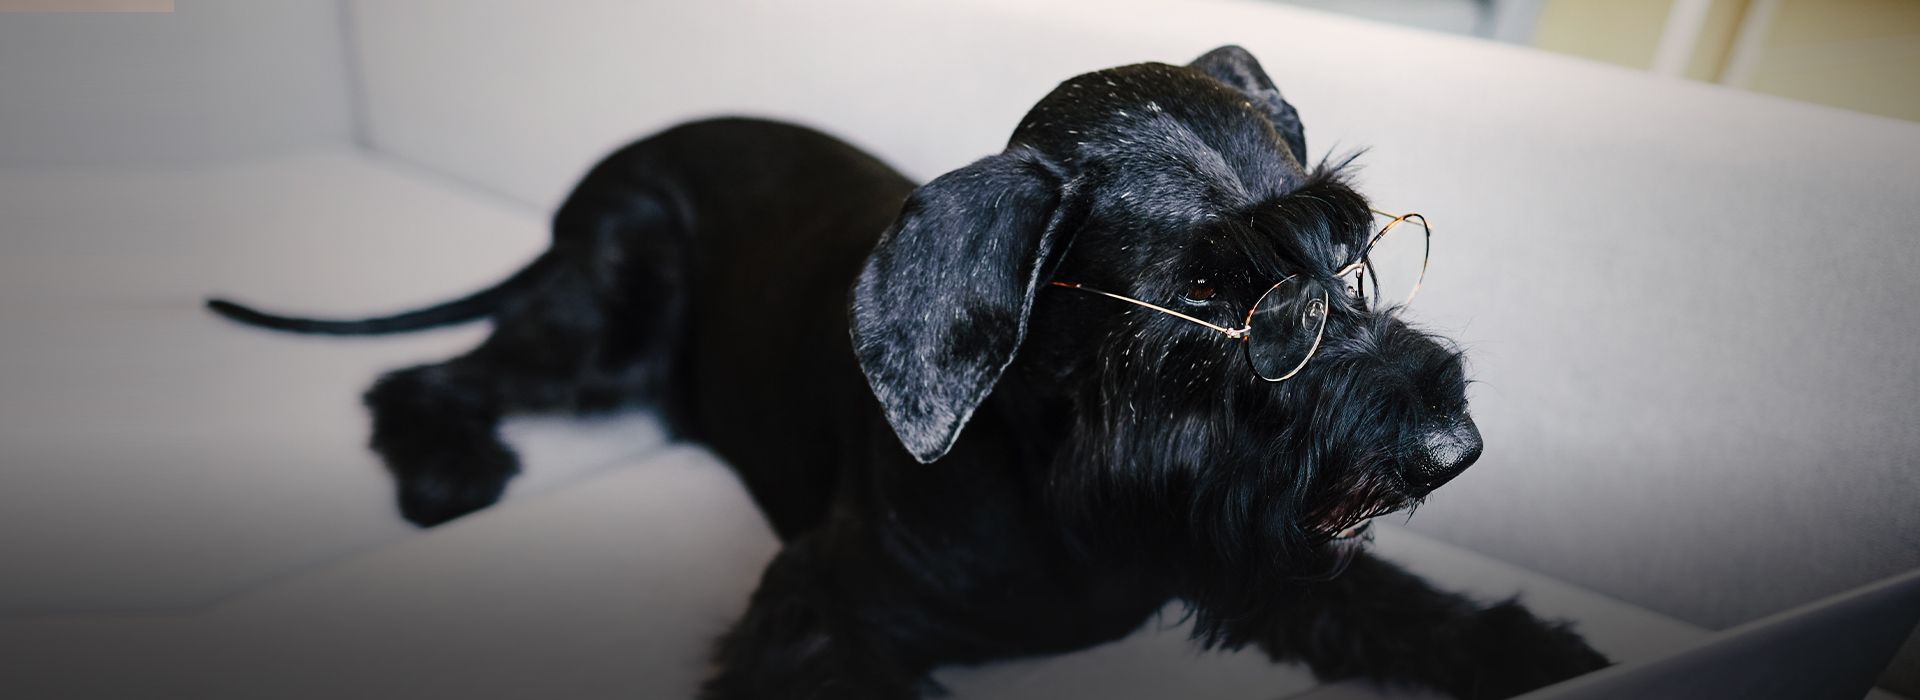 black trained dog wearing glasses for vision lying on sofa in front of laptop computer